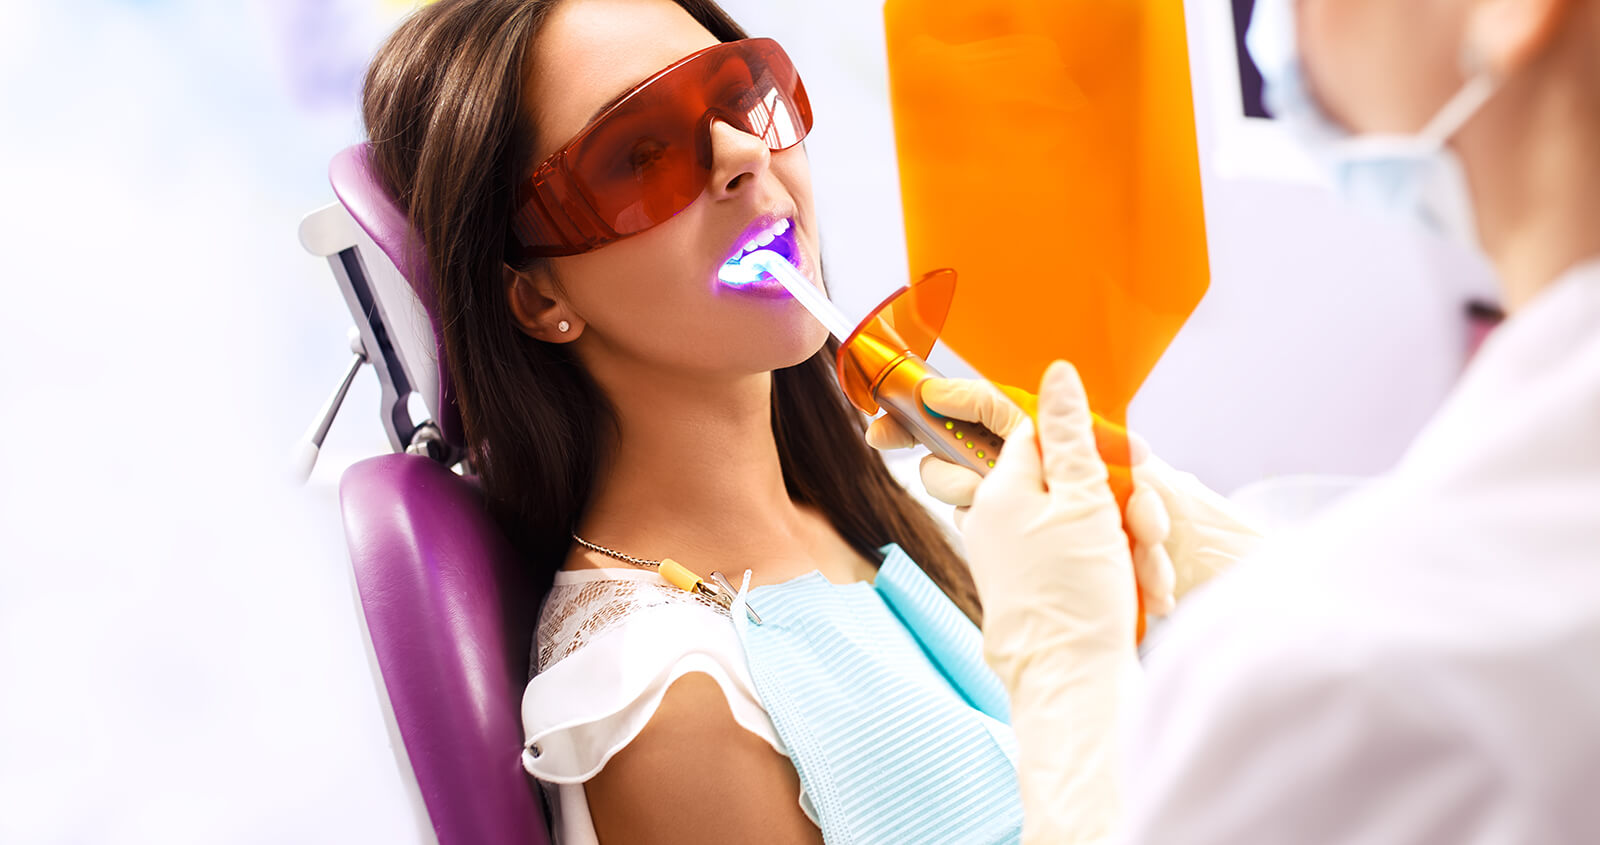 Dentist Explains Ozone Dental Therapy Used with Many Treatments in His Office in Overland Park, KS Area